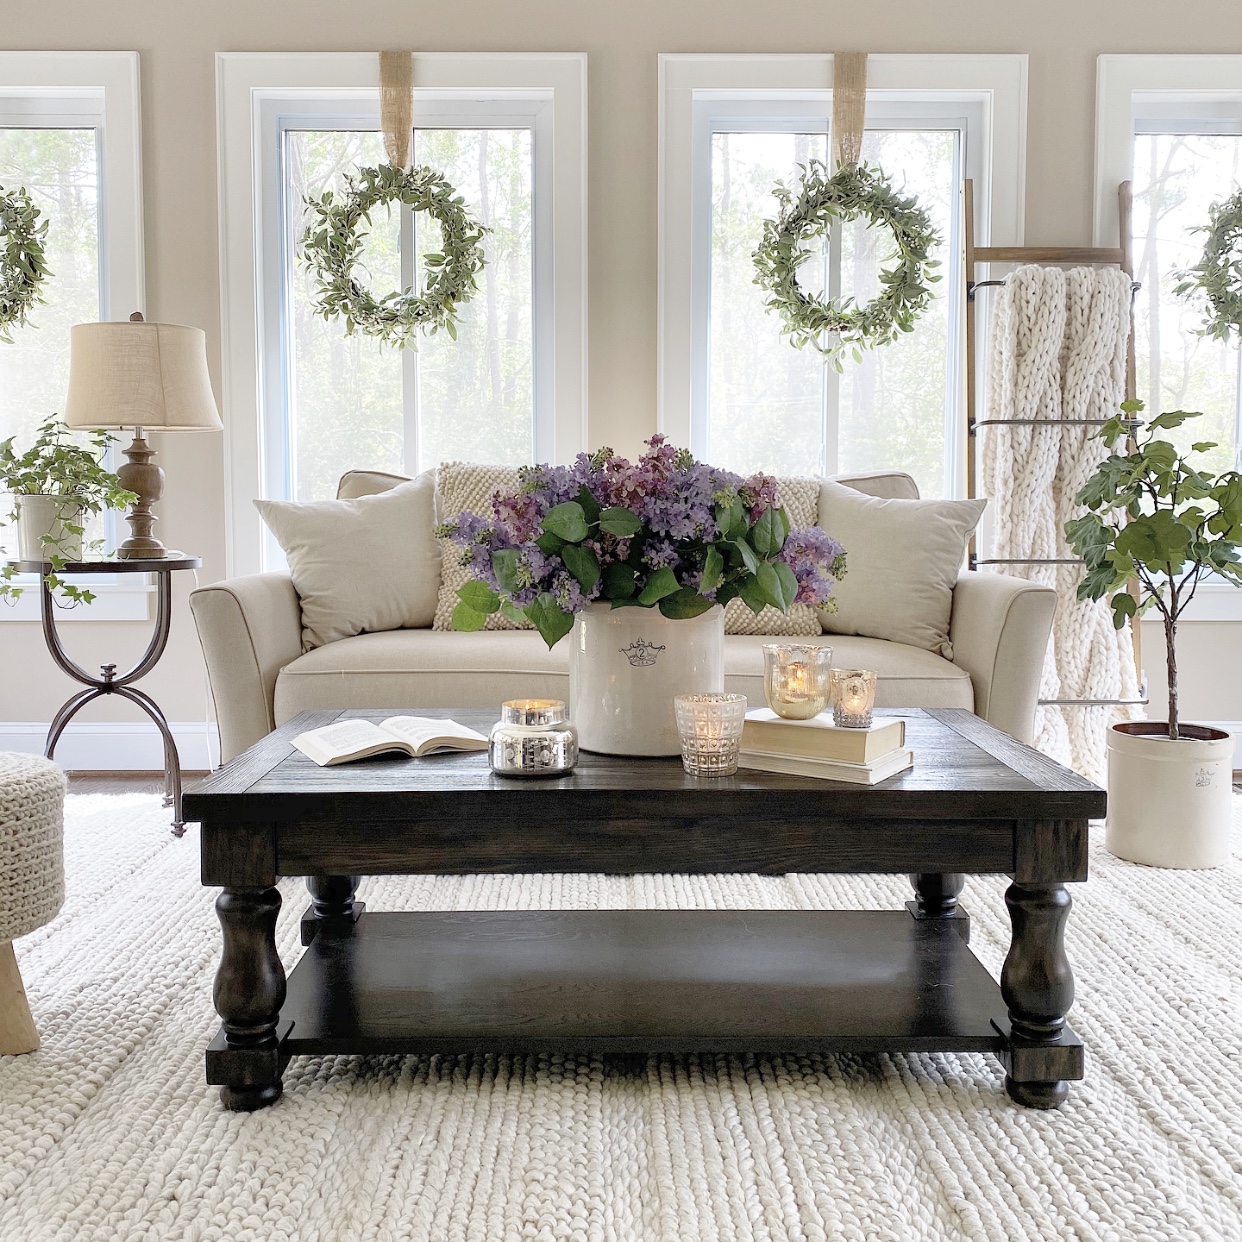 37 Farmhouse Rug Ideas for Living Room You Can't Live Without